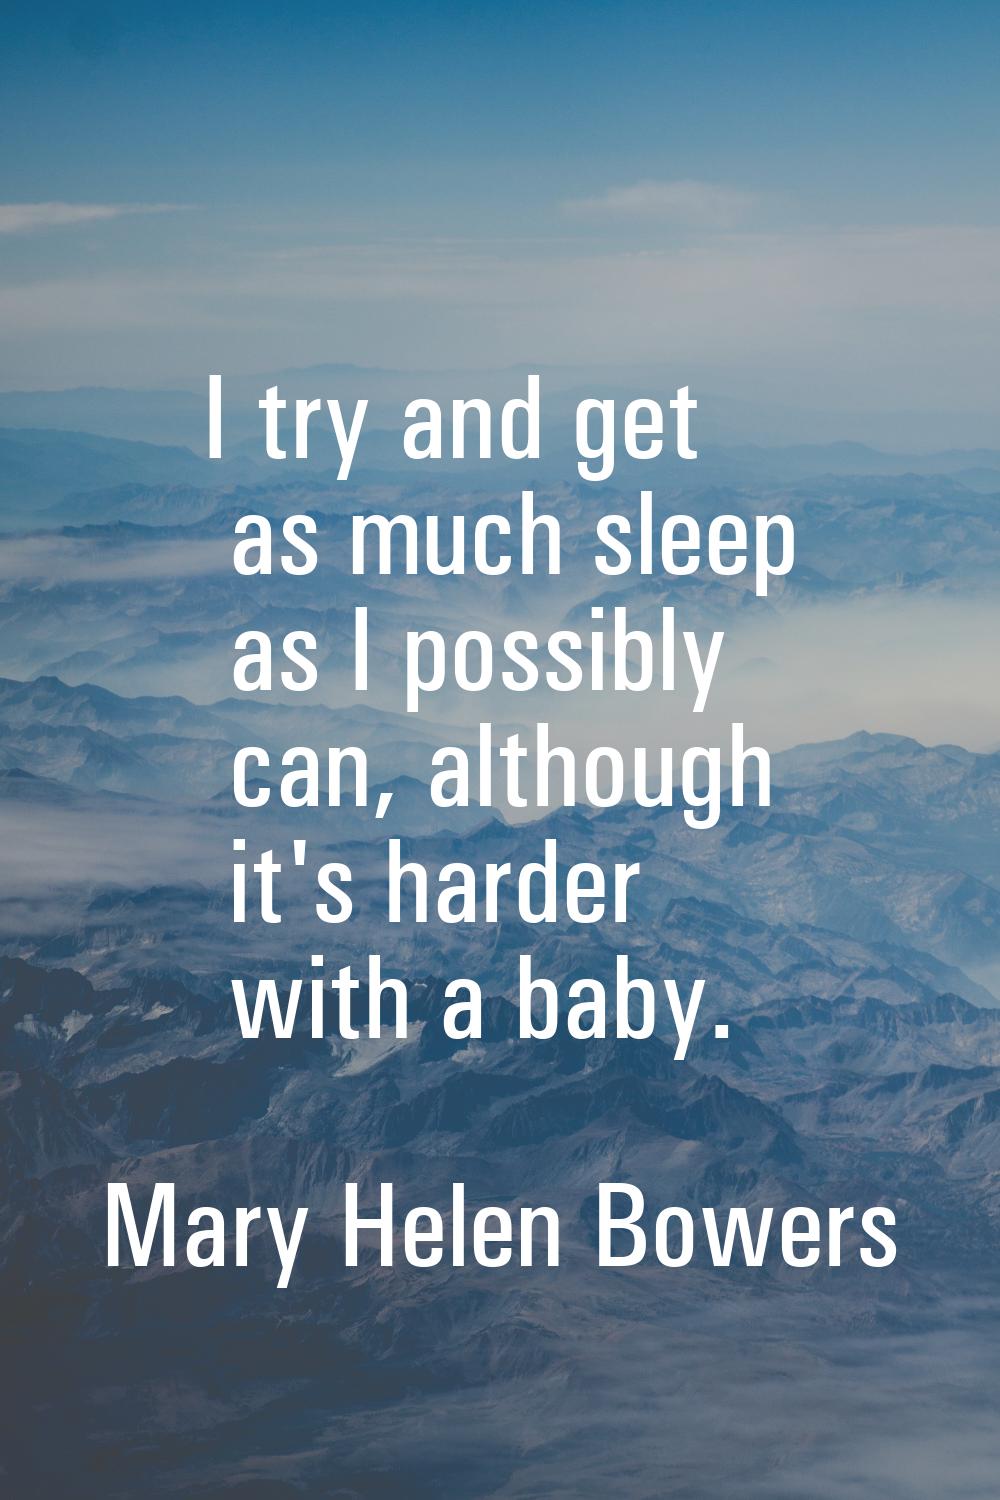 I try and get as much sleep as I possibly can, although it's harder with a baby.